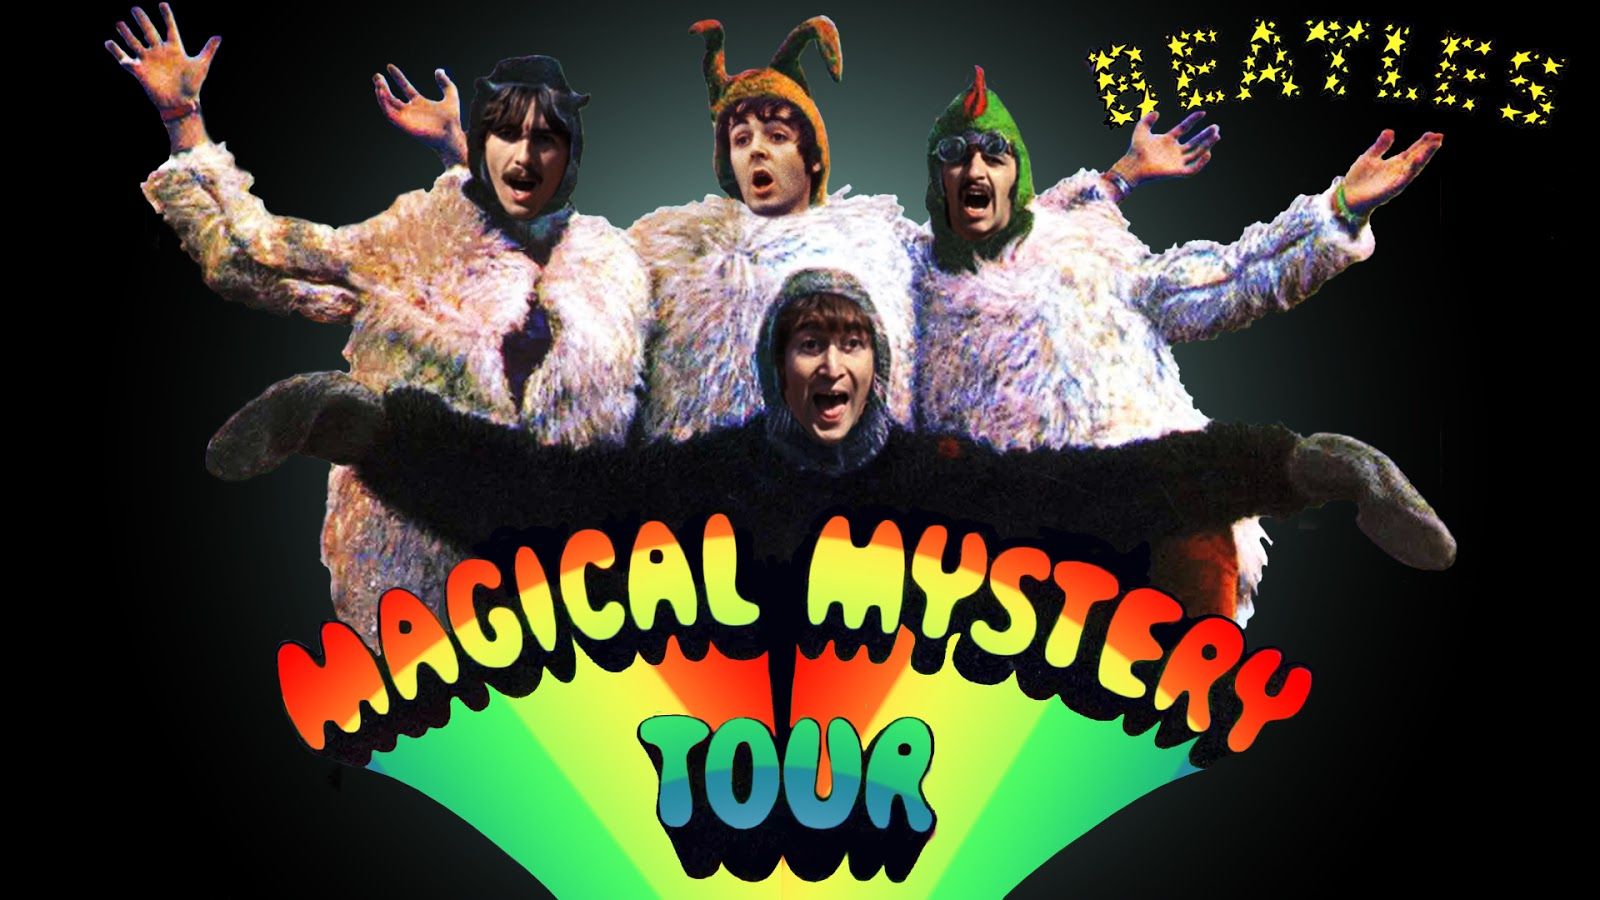 Years Ago: The Beatles and 'Magical Mystery Tour'. Montreal's